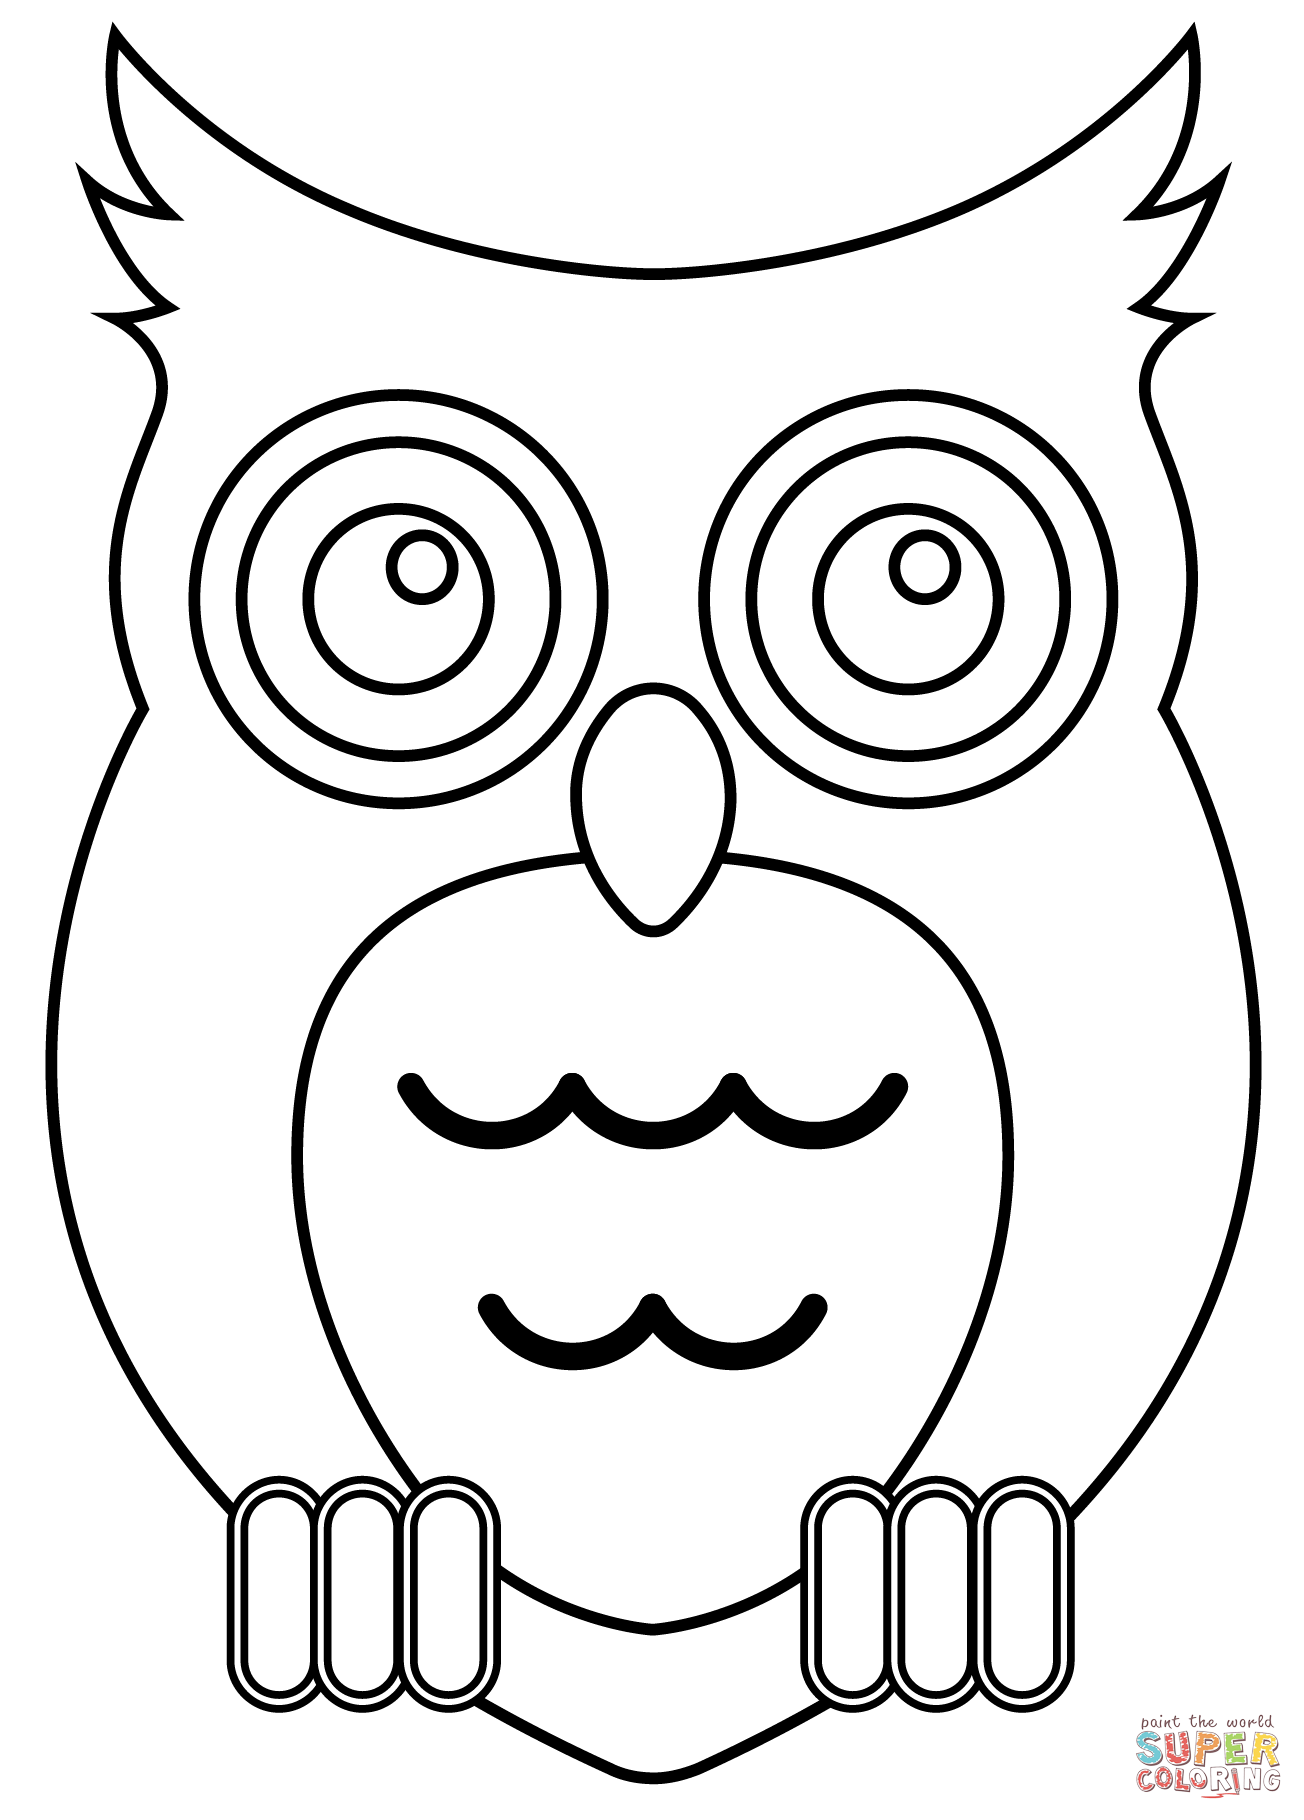 Owl emoji coloring page free printable coloring pages